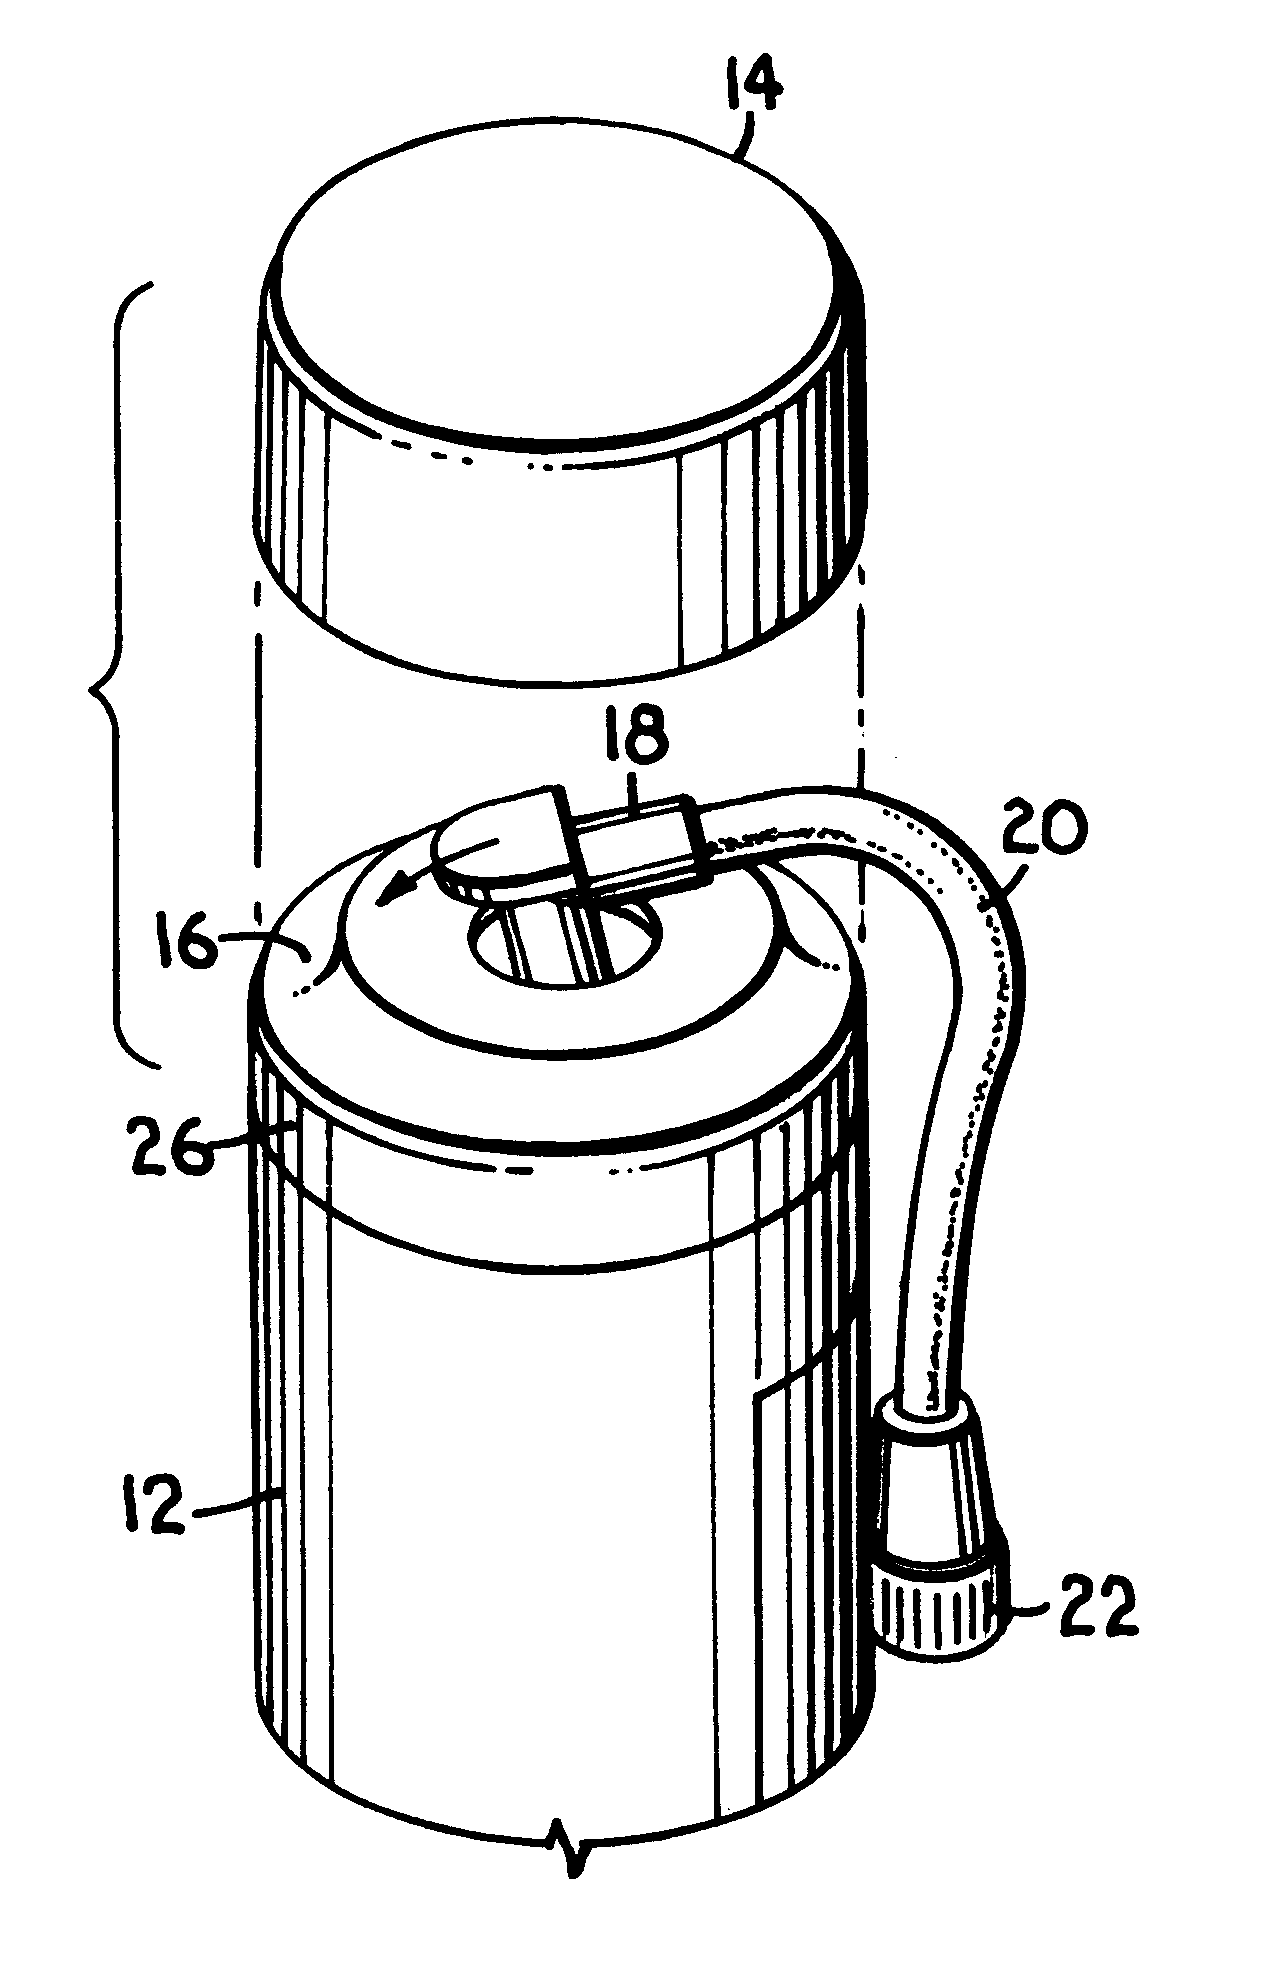 Self-contained hose assembly for a pressurized canister